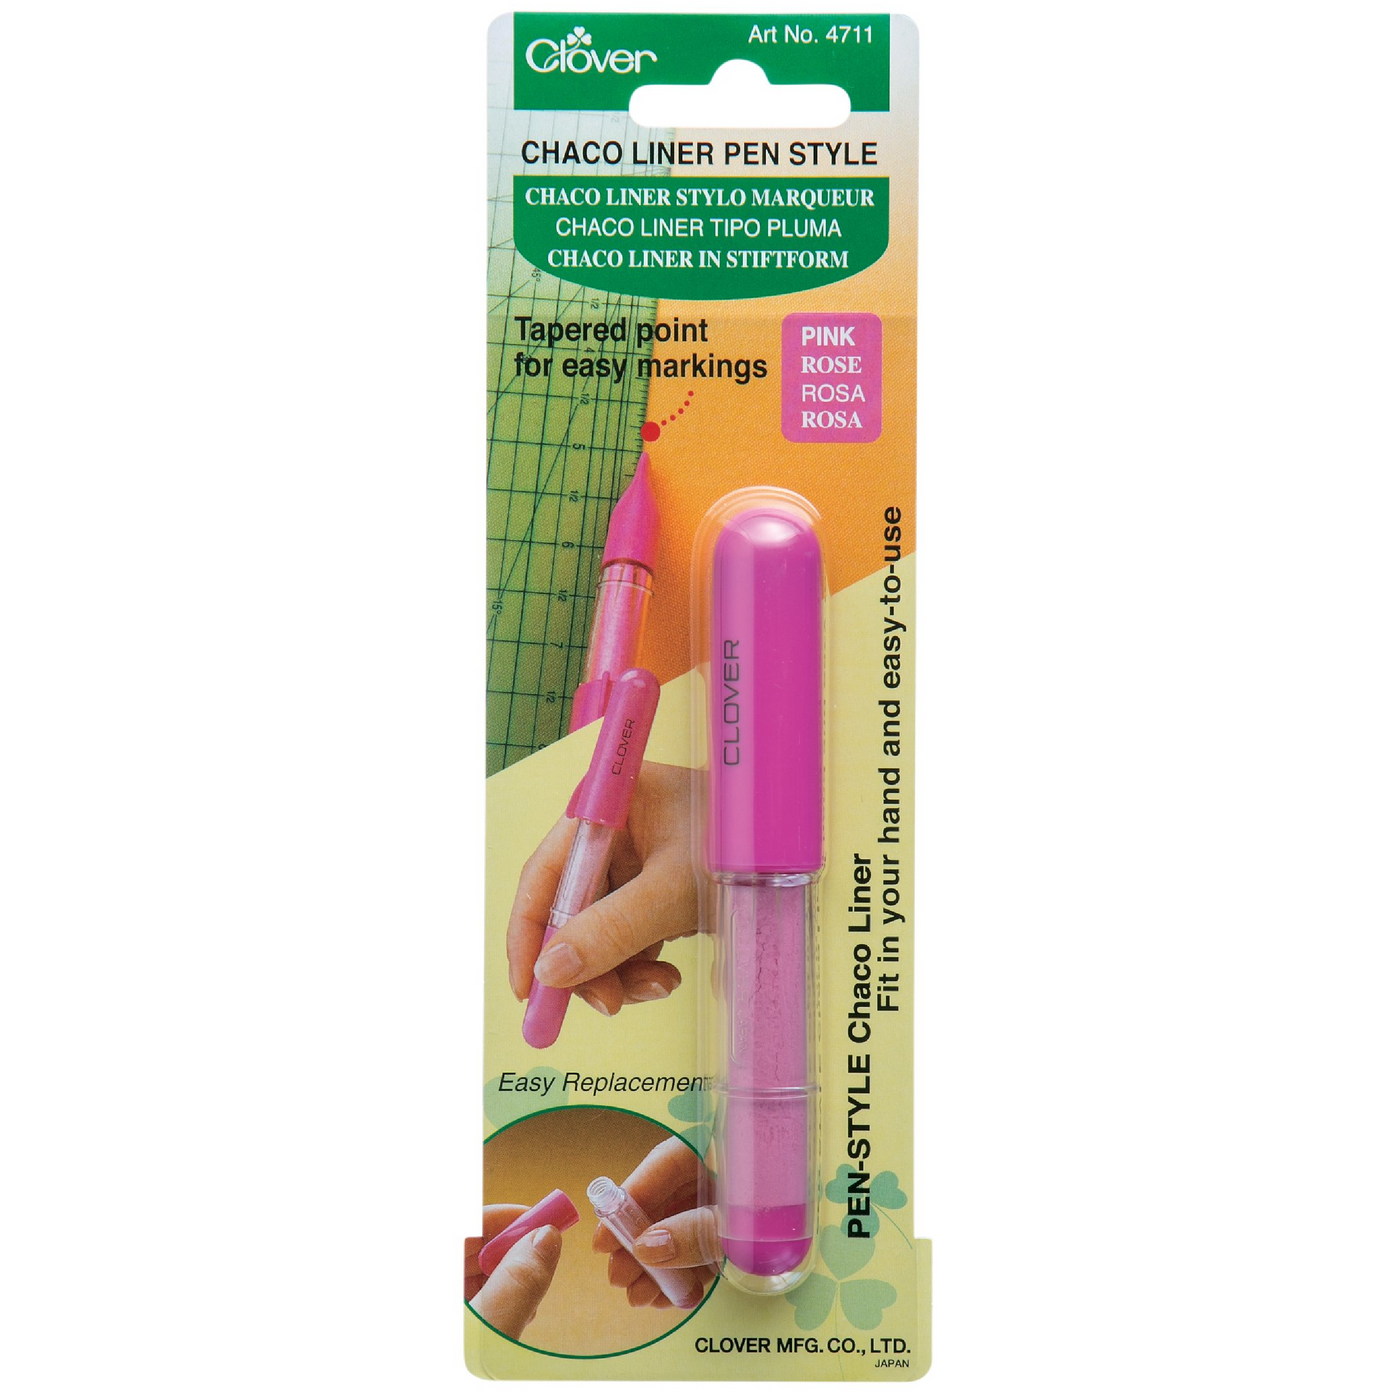 Chaco Liner Pen Style Pink